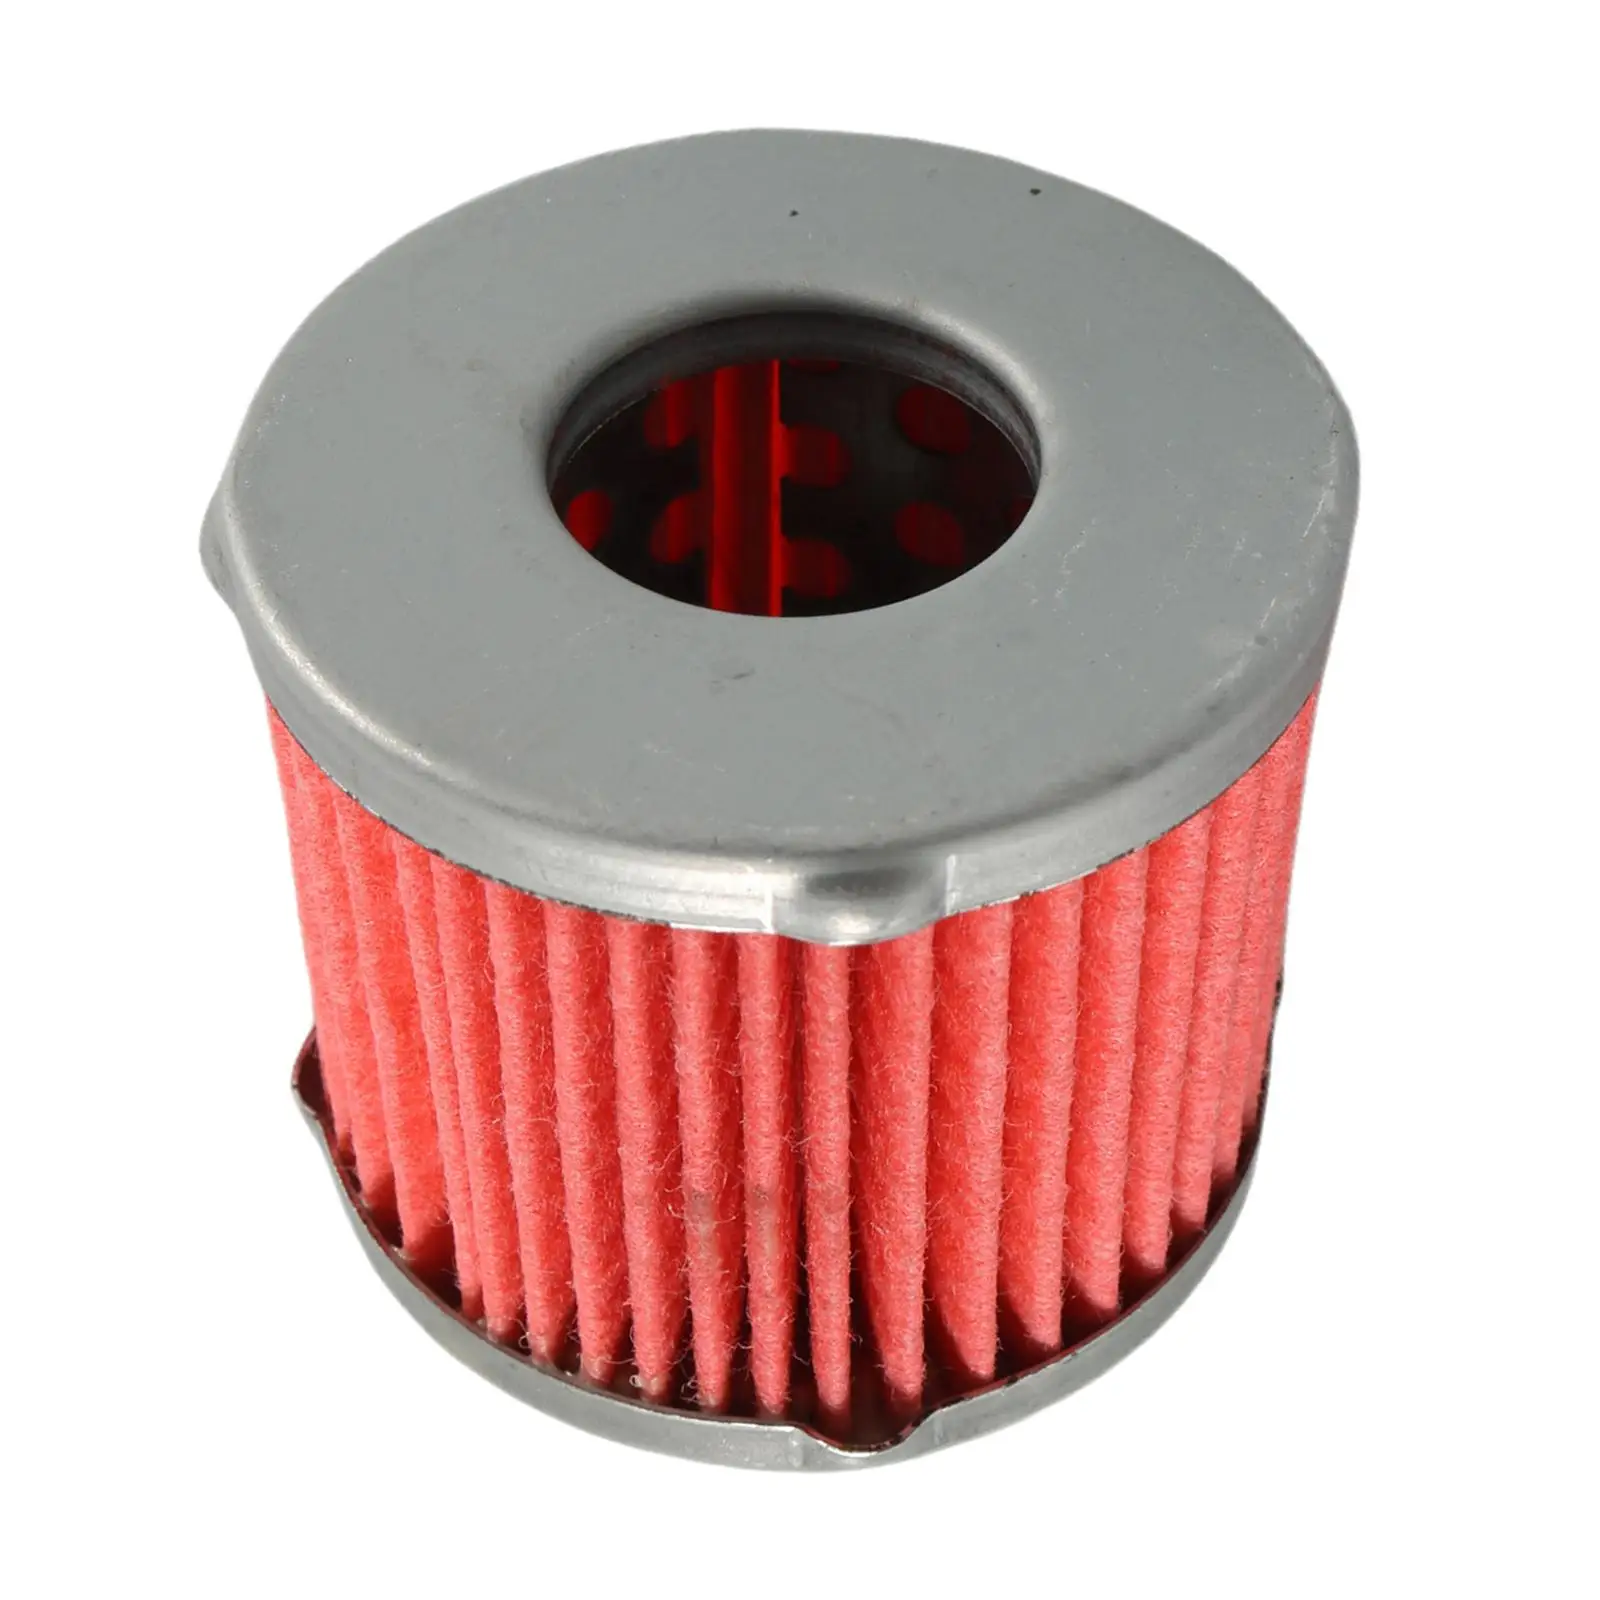 Car Automatic Transmission Filter Repair Part 25450 Ray 003 25450-Ray-003 Easy Installation Fit for Acura TL Automatic